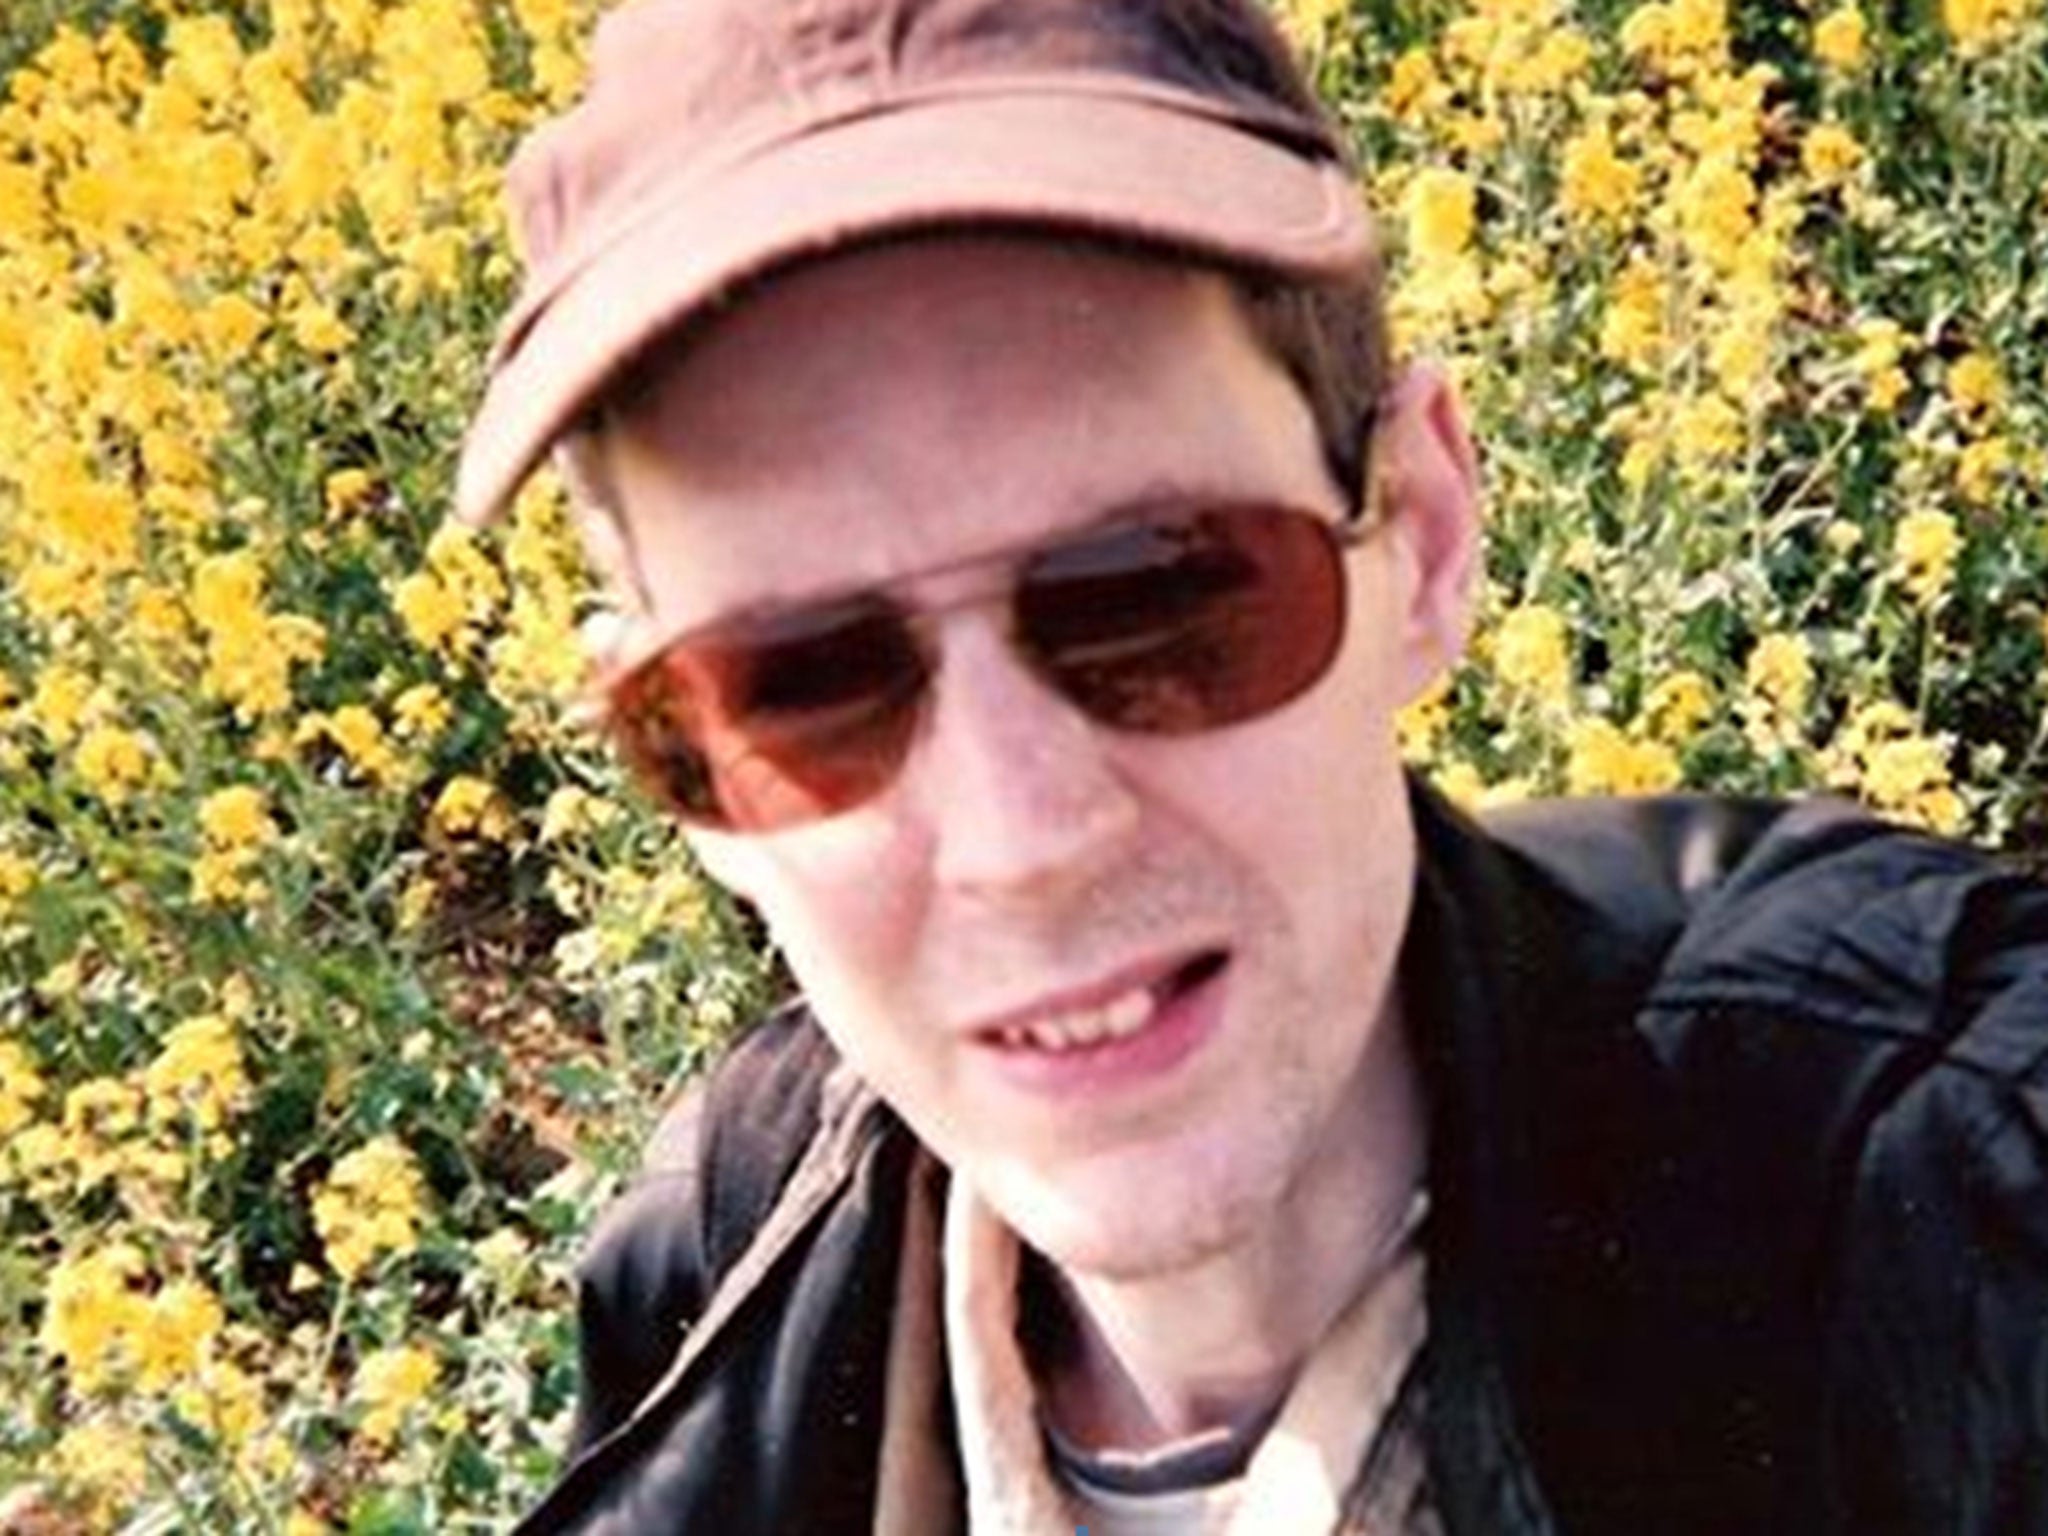 Mark Wood, 44, died of starvation after his benefits were cut to £40 a week